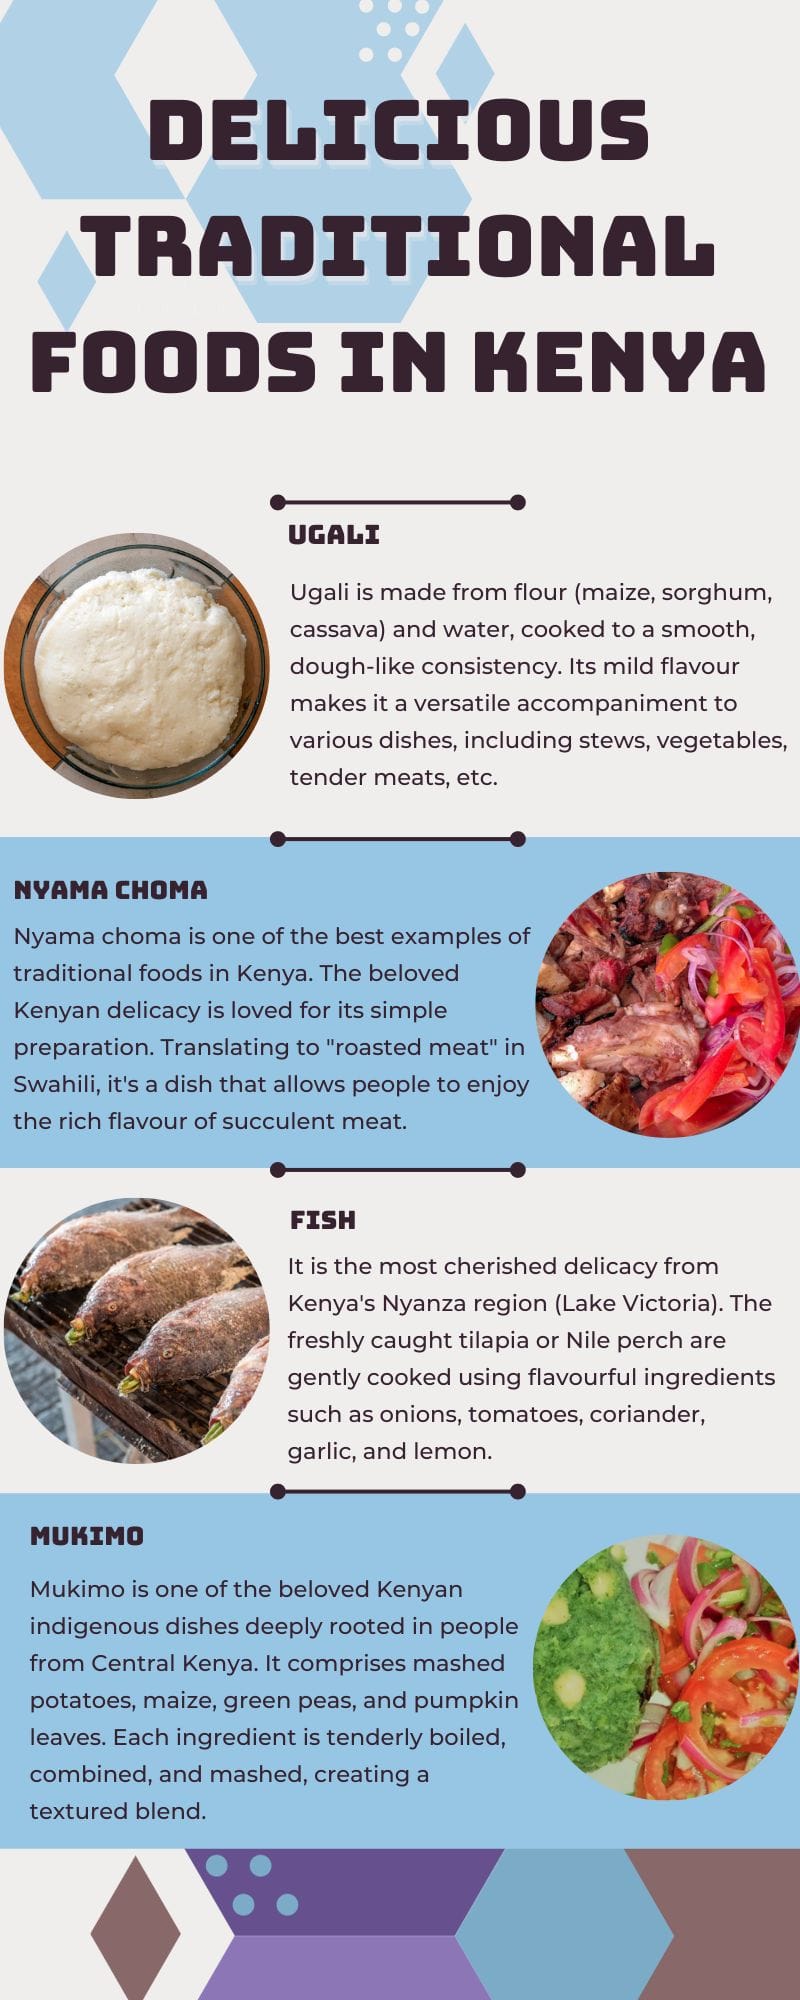 Delicious traditional foods in Kenya